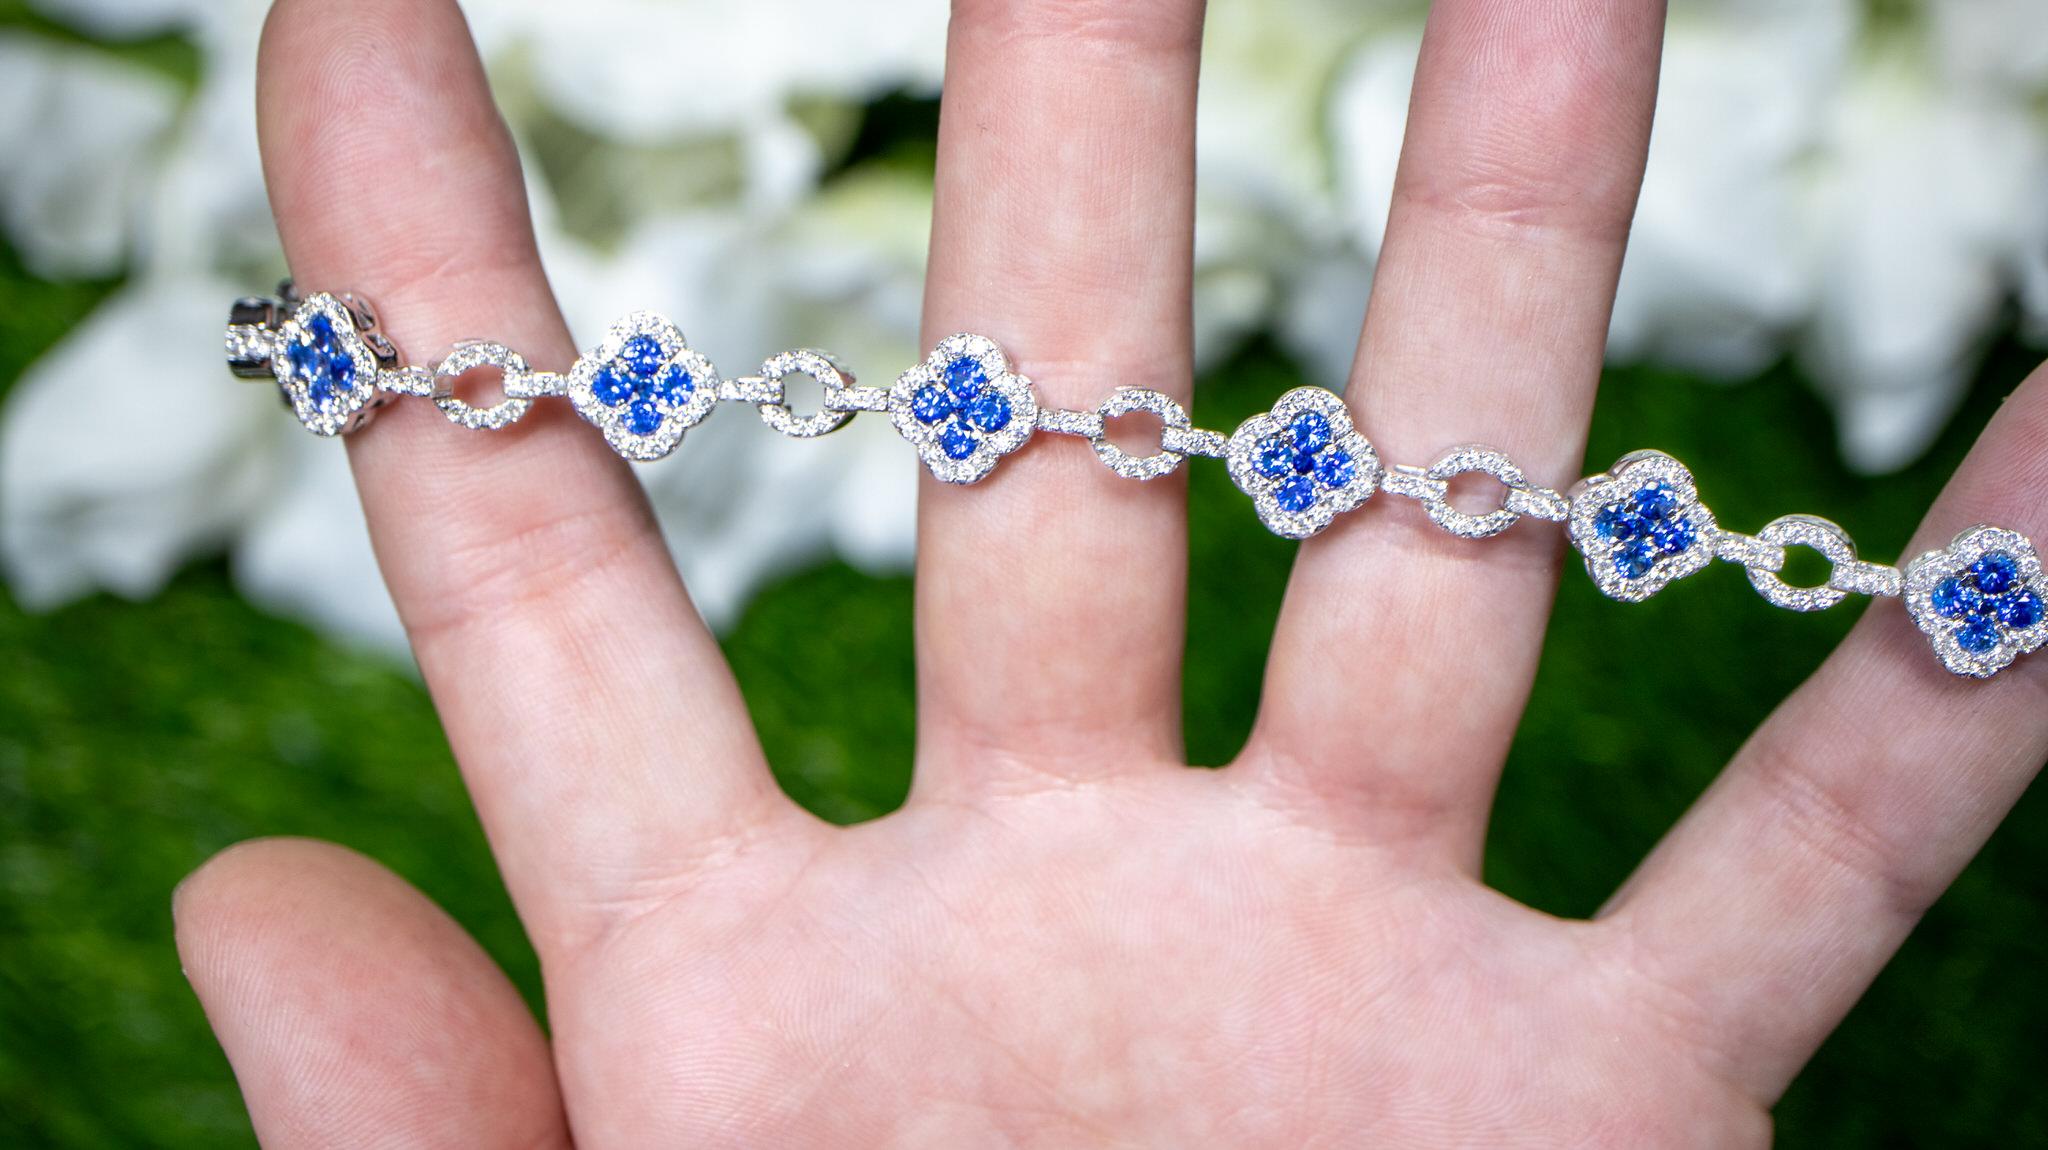 Clover Sapphire Bracelet Diamond Links 5.38 Carats 18K White Gold In Excellent Condition For Sale In Laguna Niguel, CA